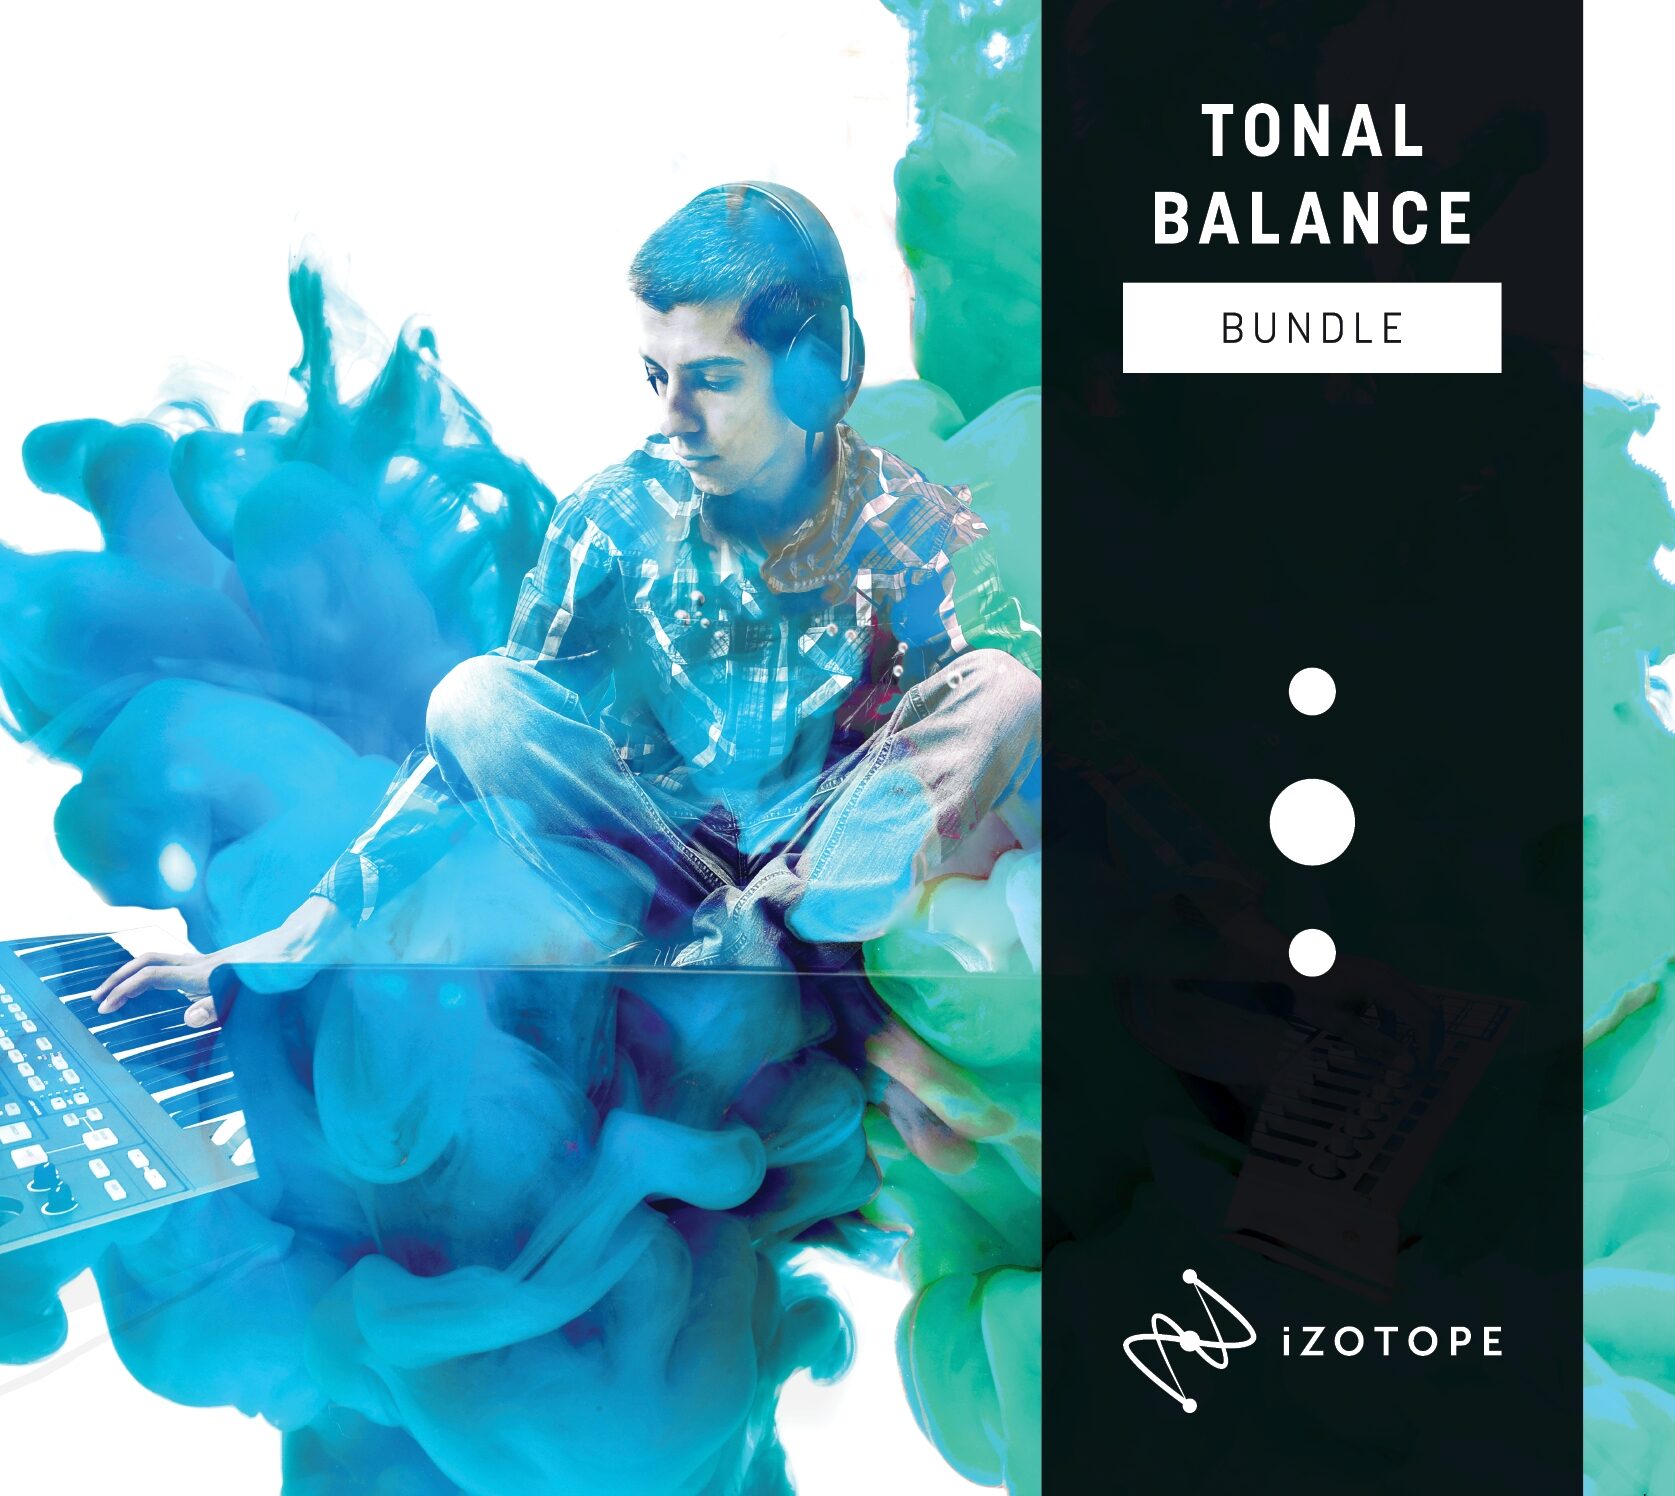 iZotope Tonal Balance Bundle Software with Melodyne 5 Essential